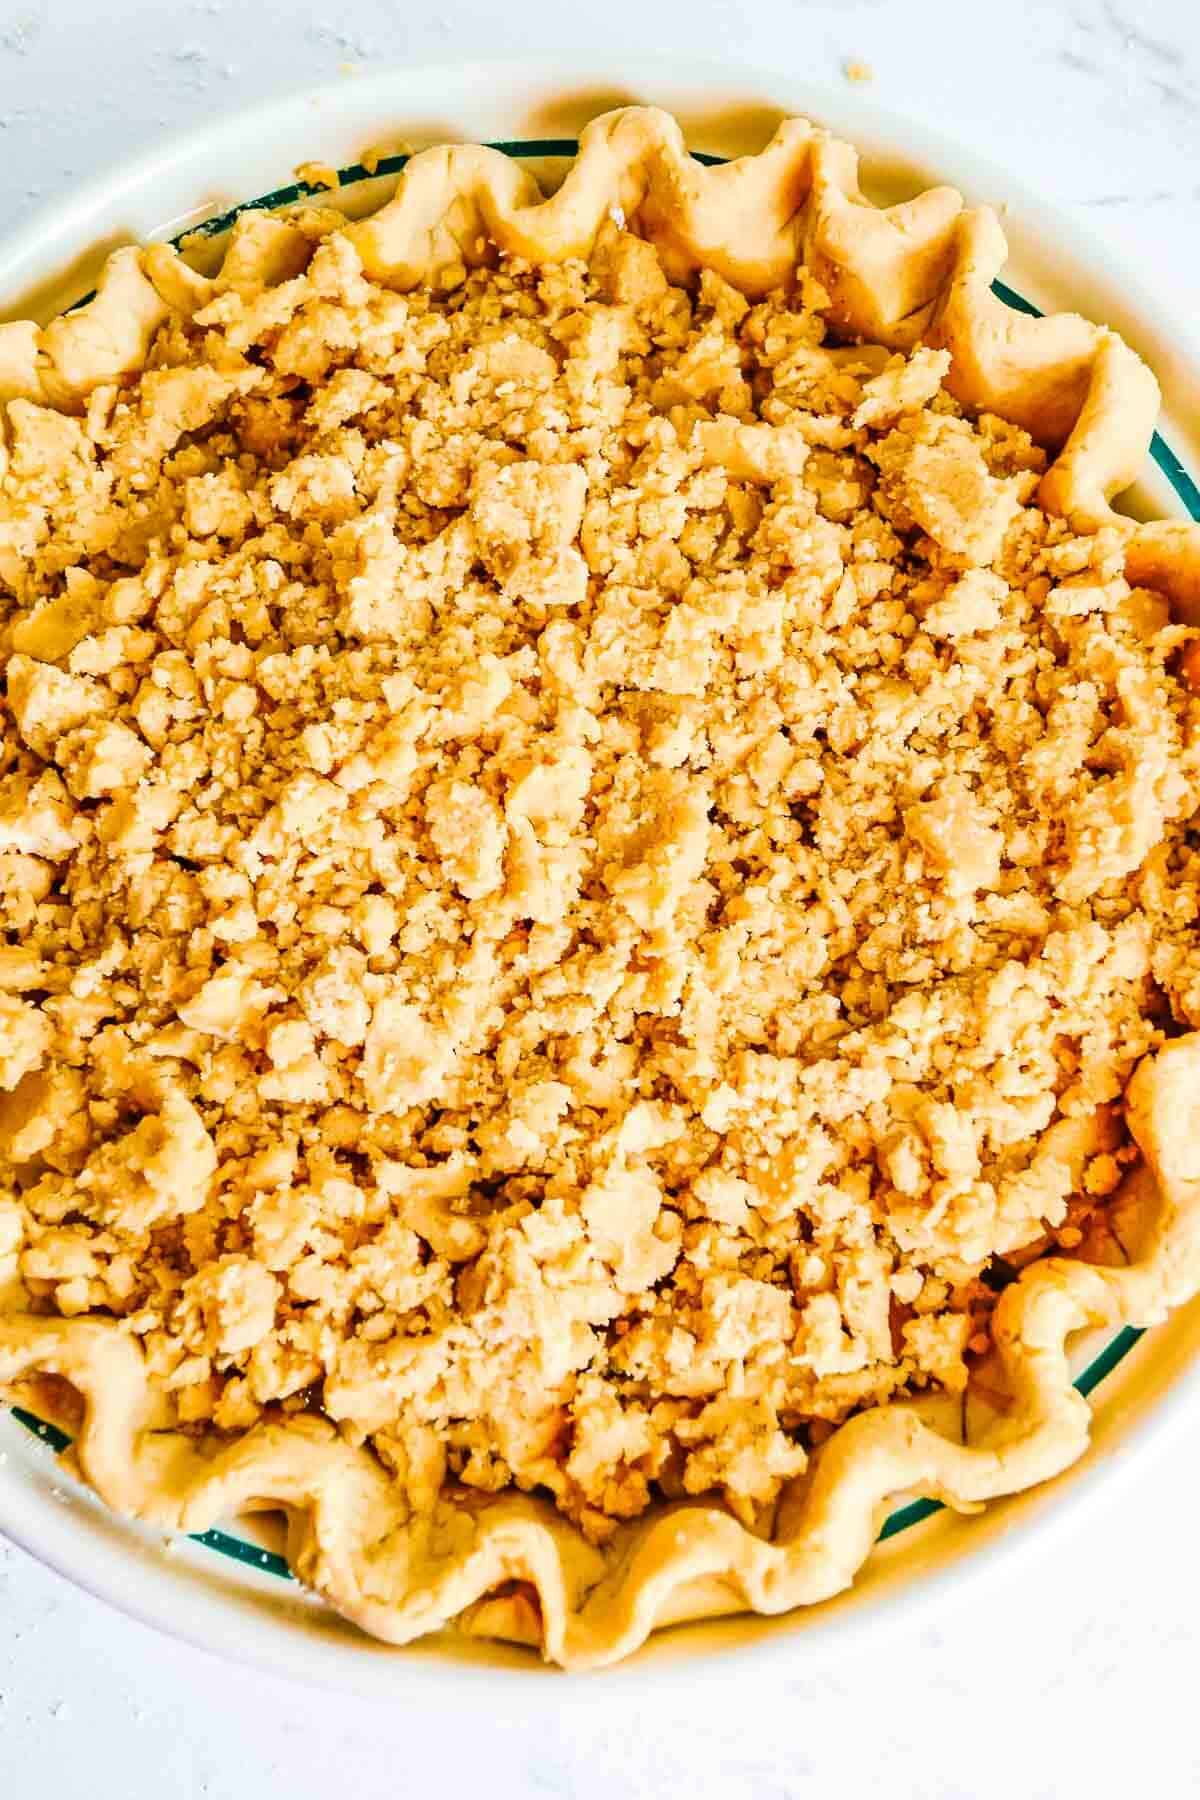 Pie shell filled with caramel apples with the crumb topping before baked.